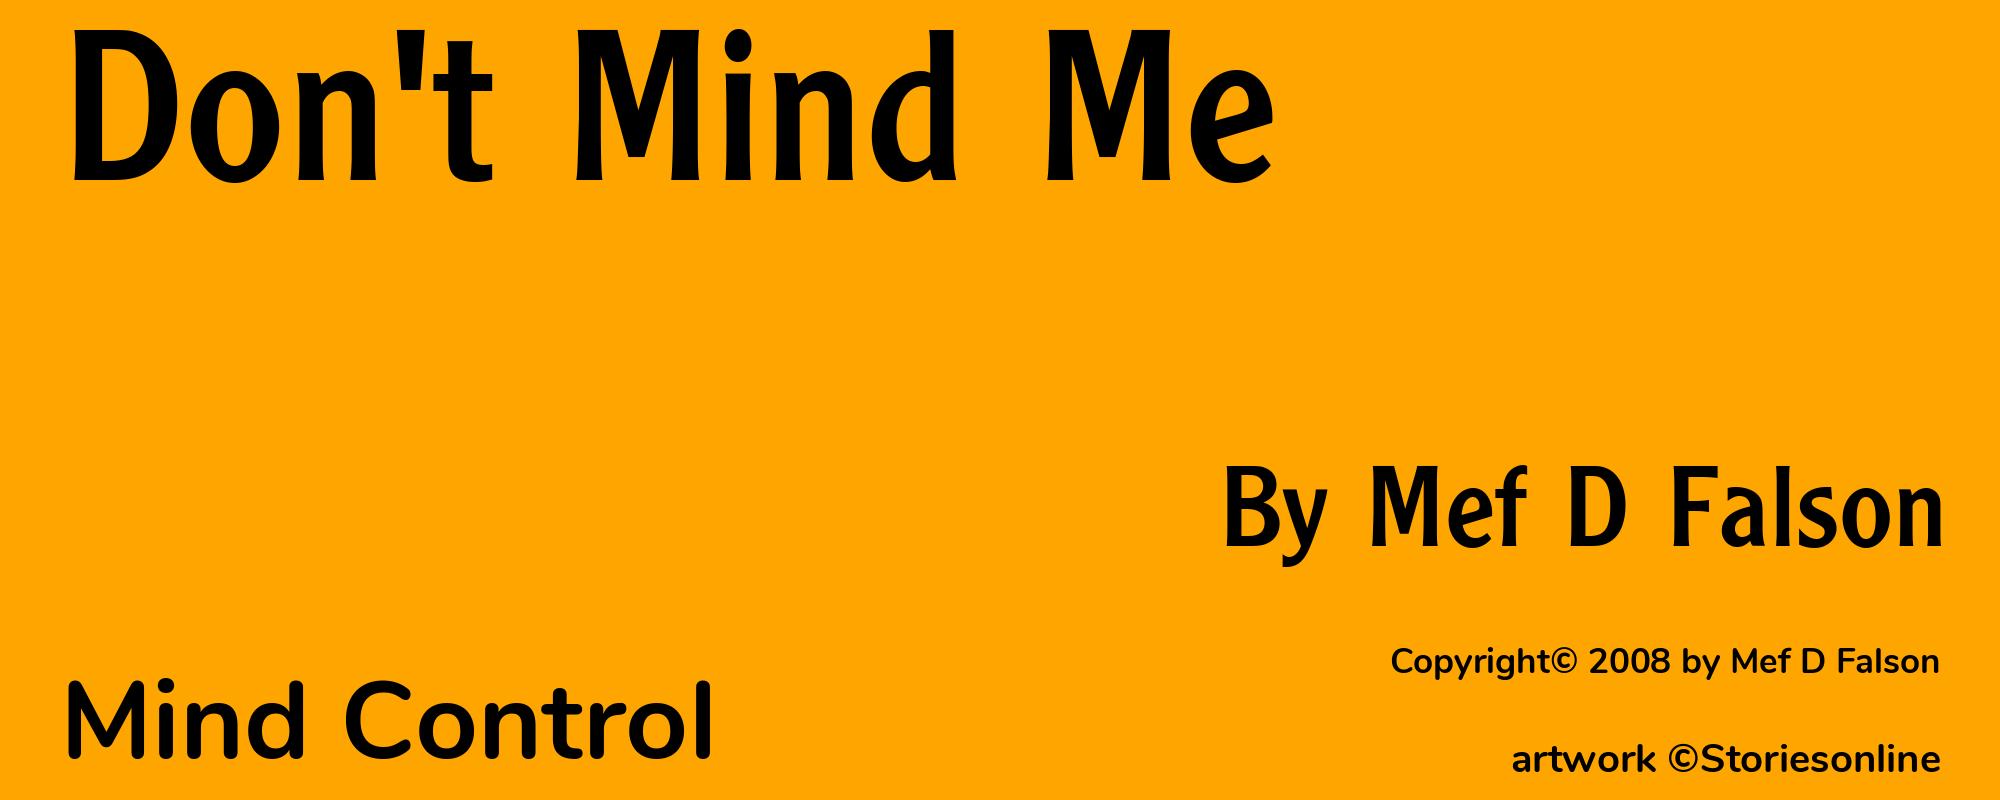 Don't Mind Me - Cover